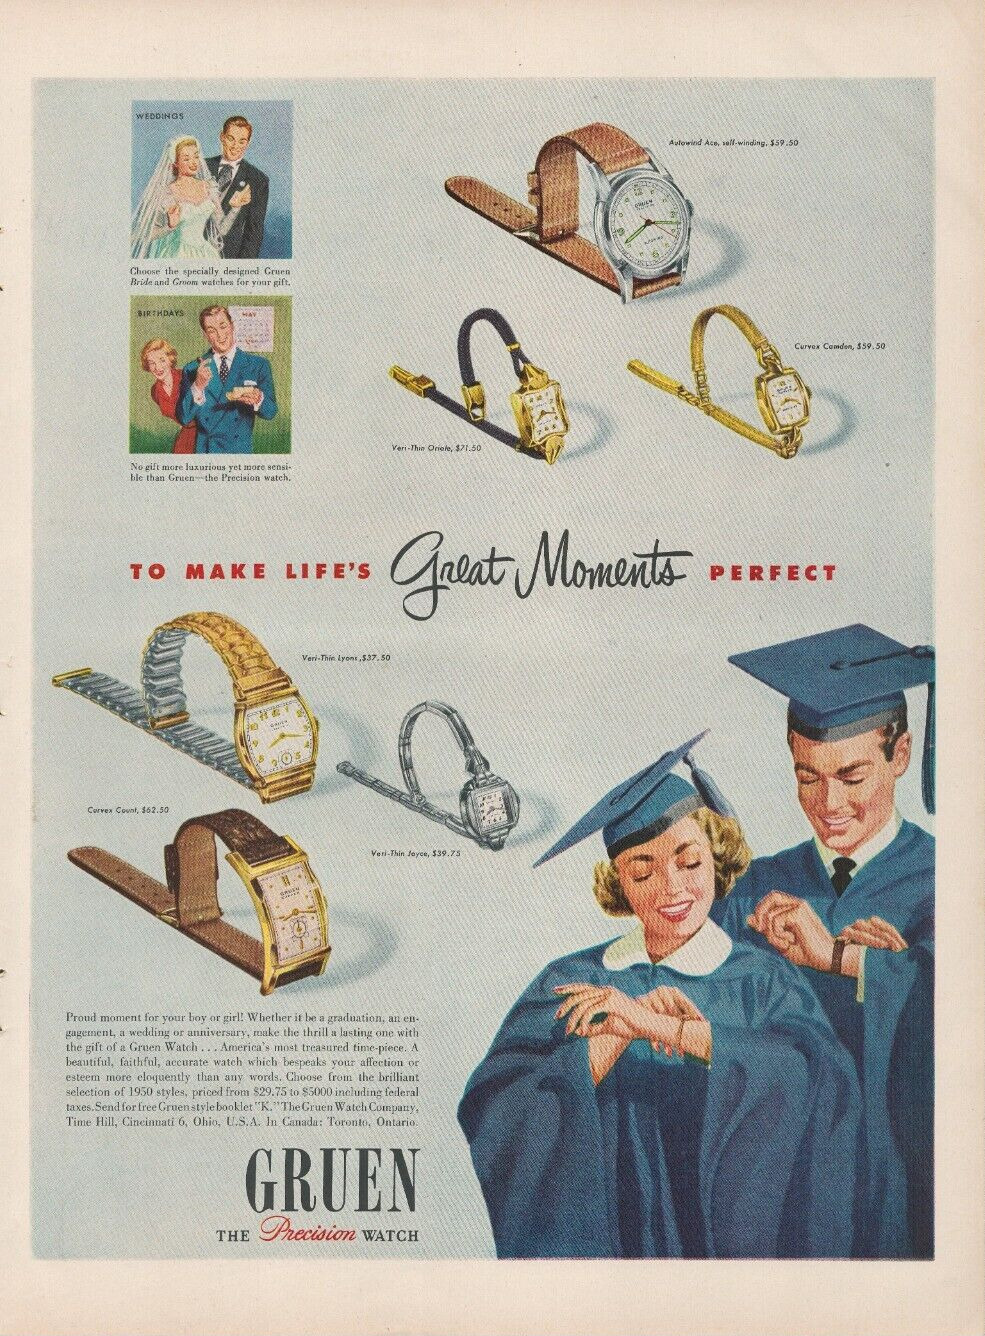 1950 Gruen Precision Watches Make Life\'s Great Moments Perfect Vintage Print Ad